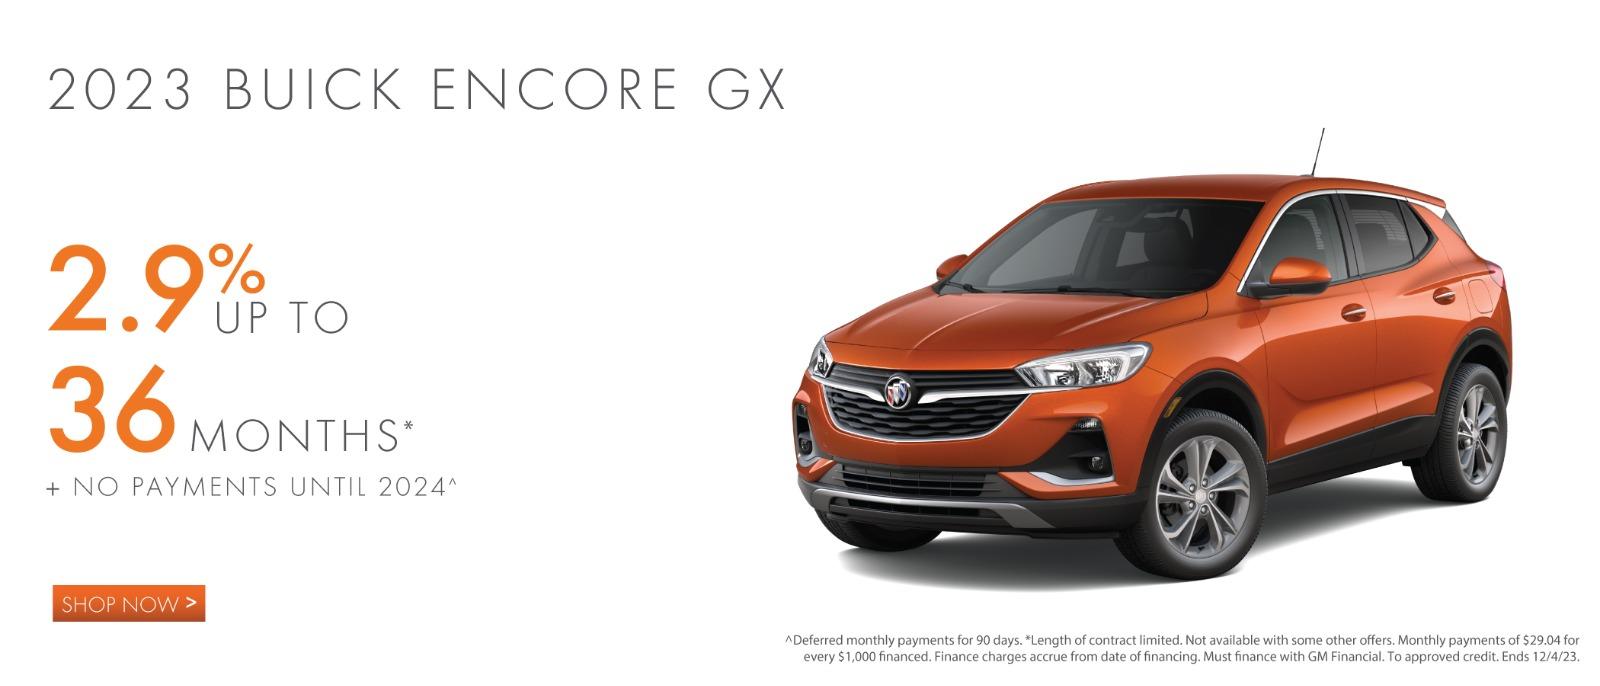 NEW 2023 Buick Encore GX 2.9% up to 36 months